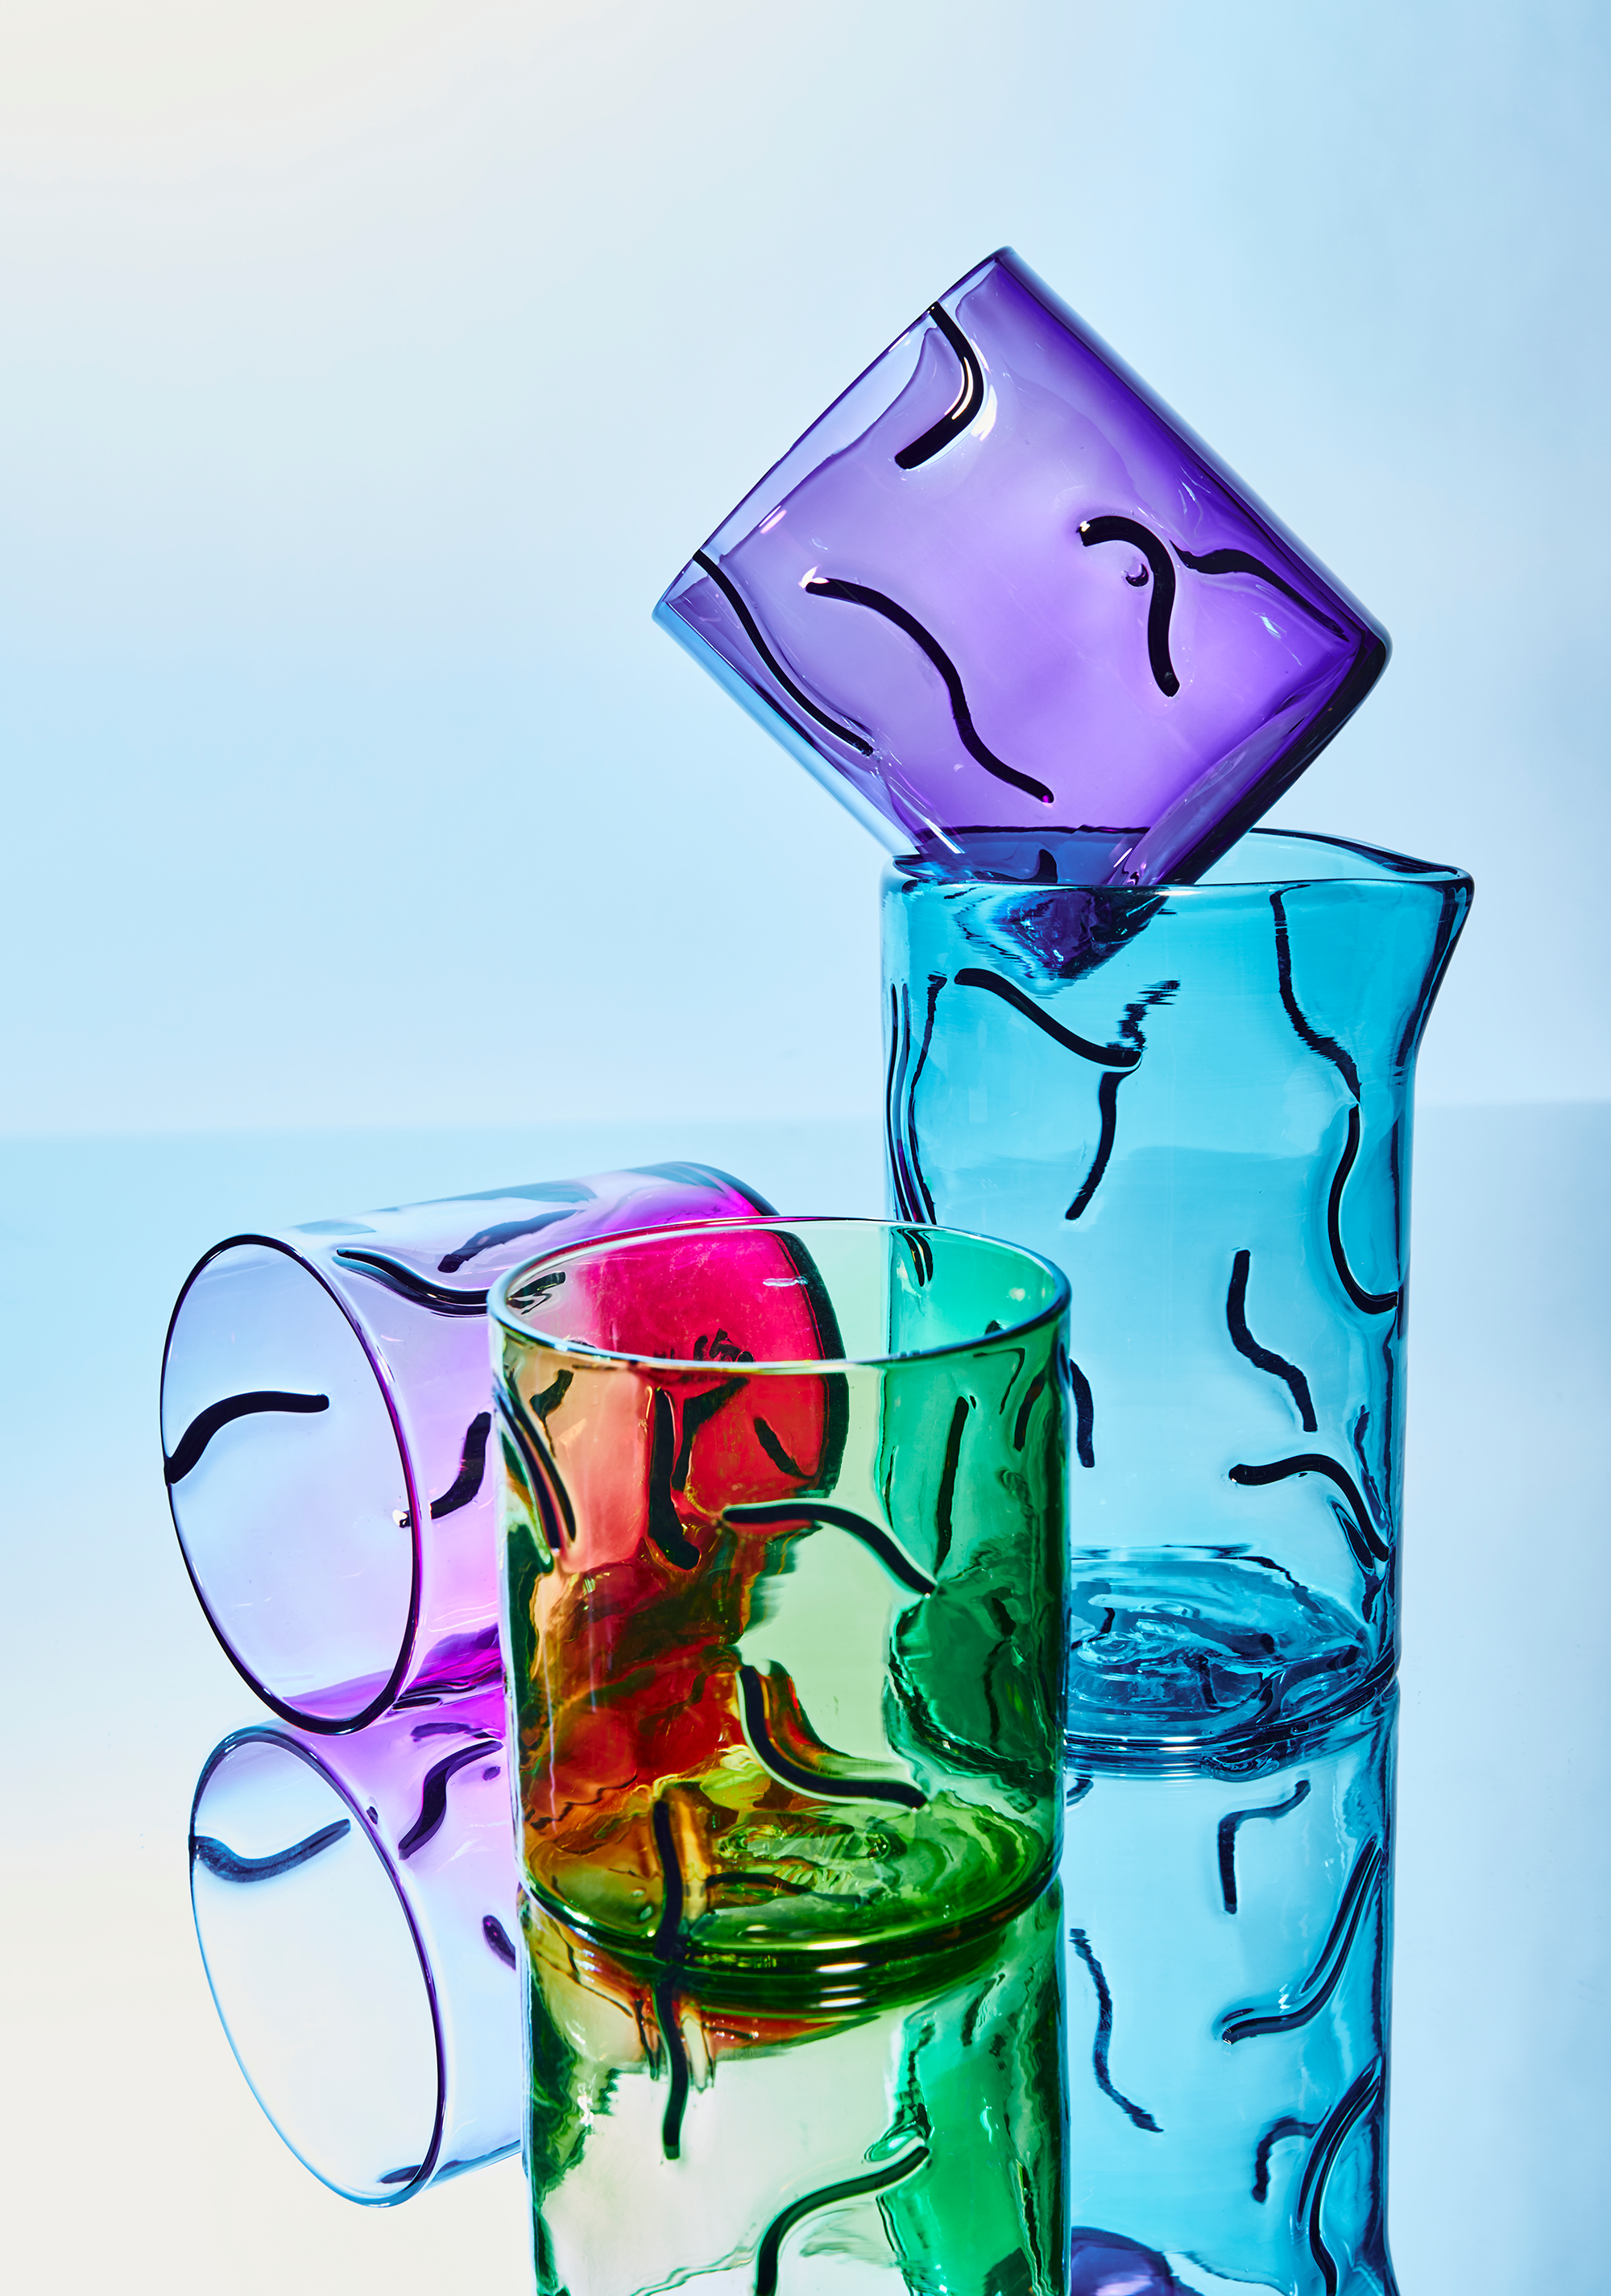 The squiggly patterns on glasses and vases in Mitchell’s Enjoué series recall transparent electronics like Game Boys and iMacs from the 1990s. Photo by Julie Dickinson.